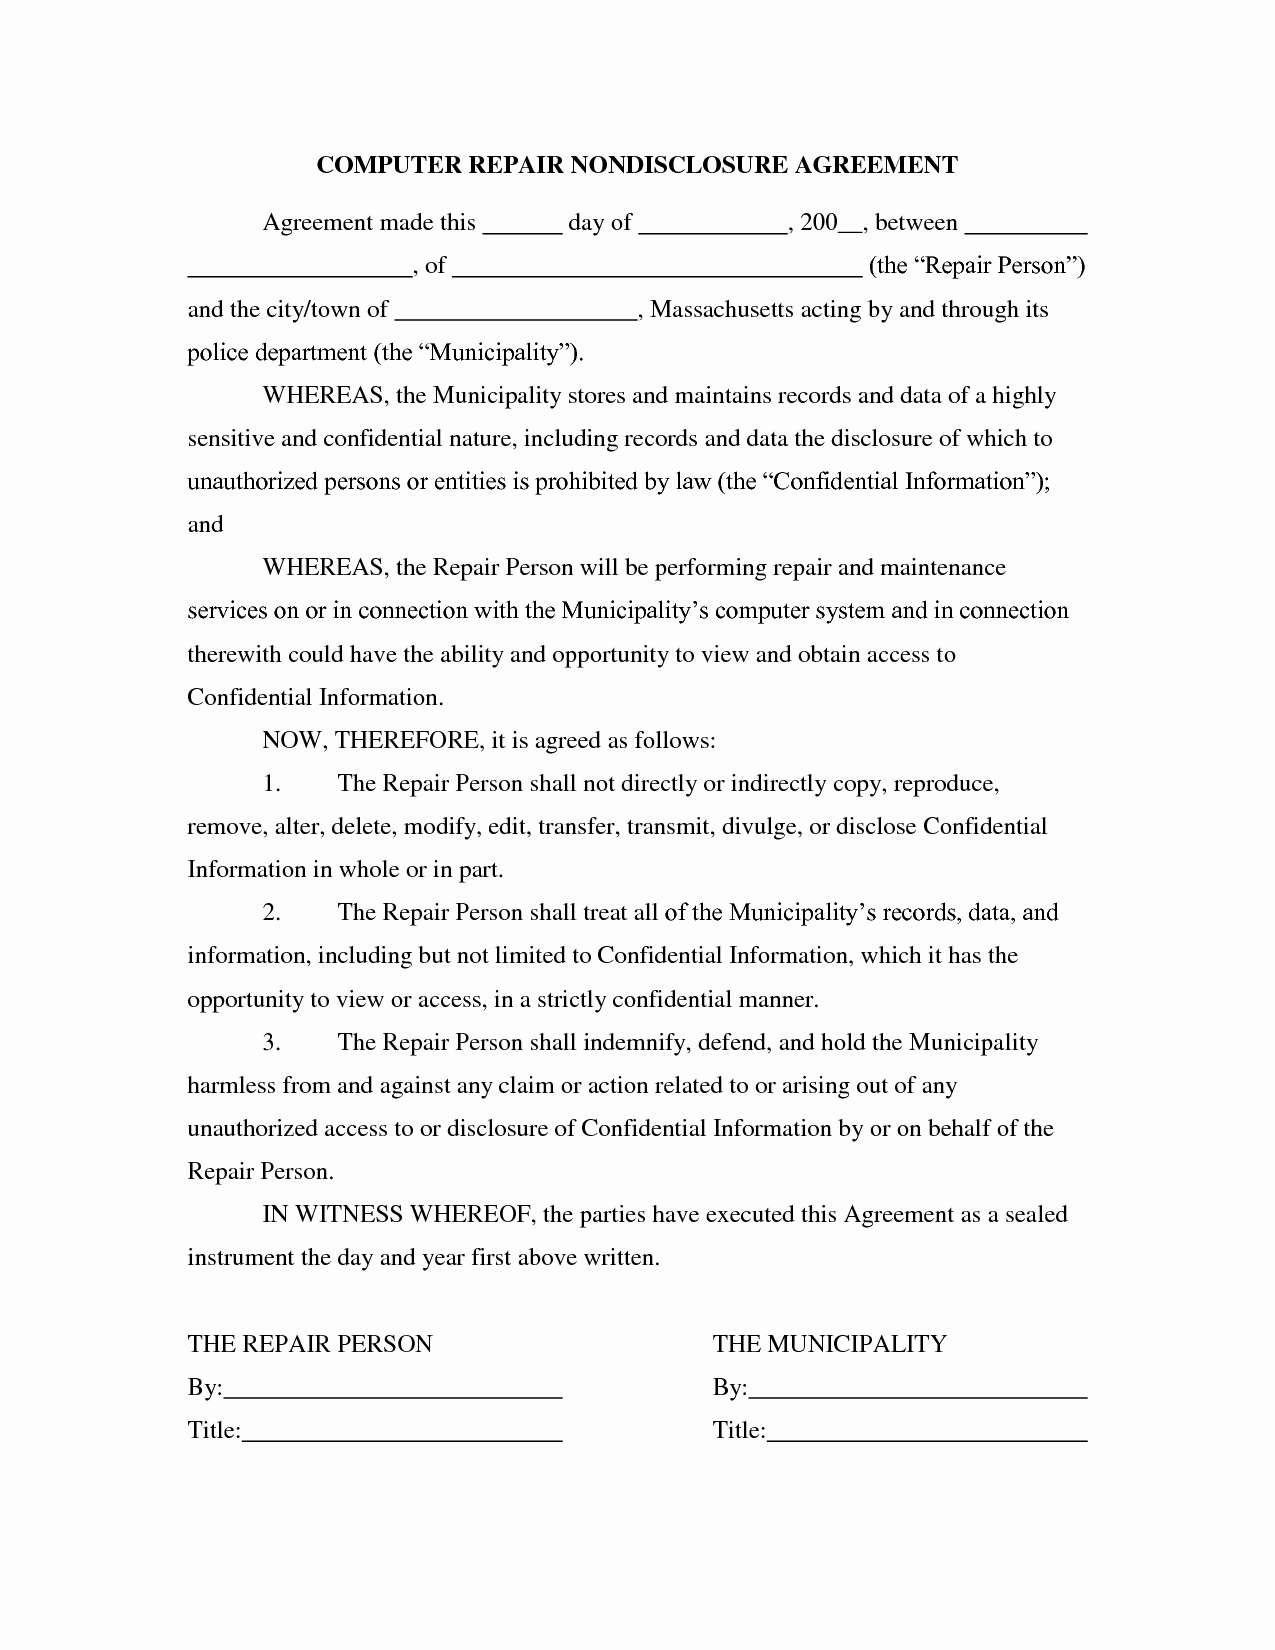 Sample Agreement Letter Between Two Parties Lovely Contract Examples Between Two Parties